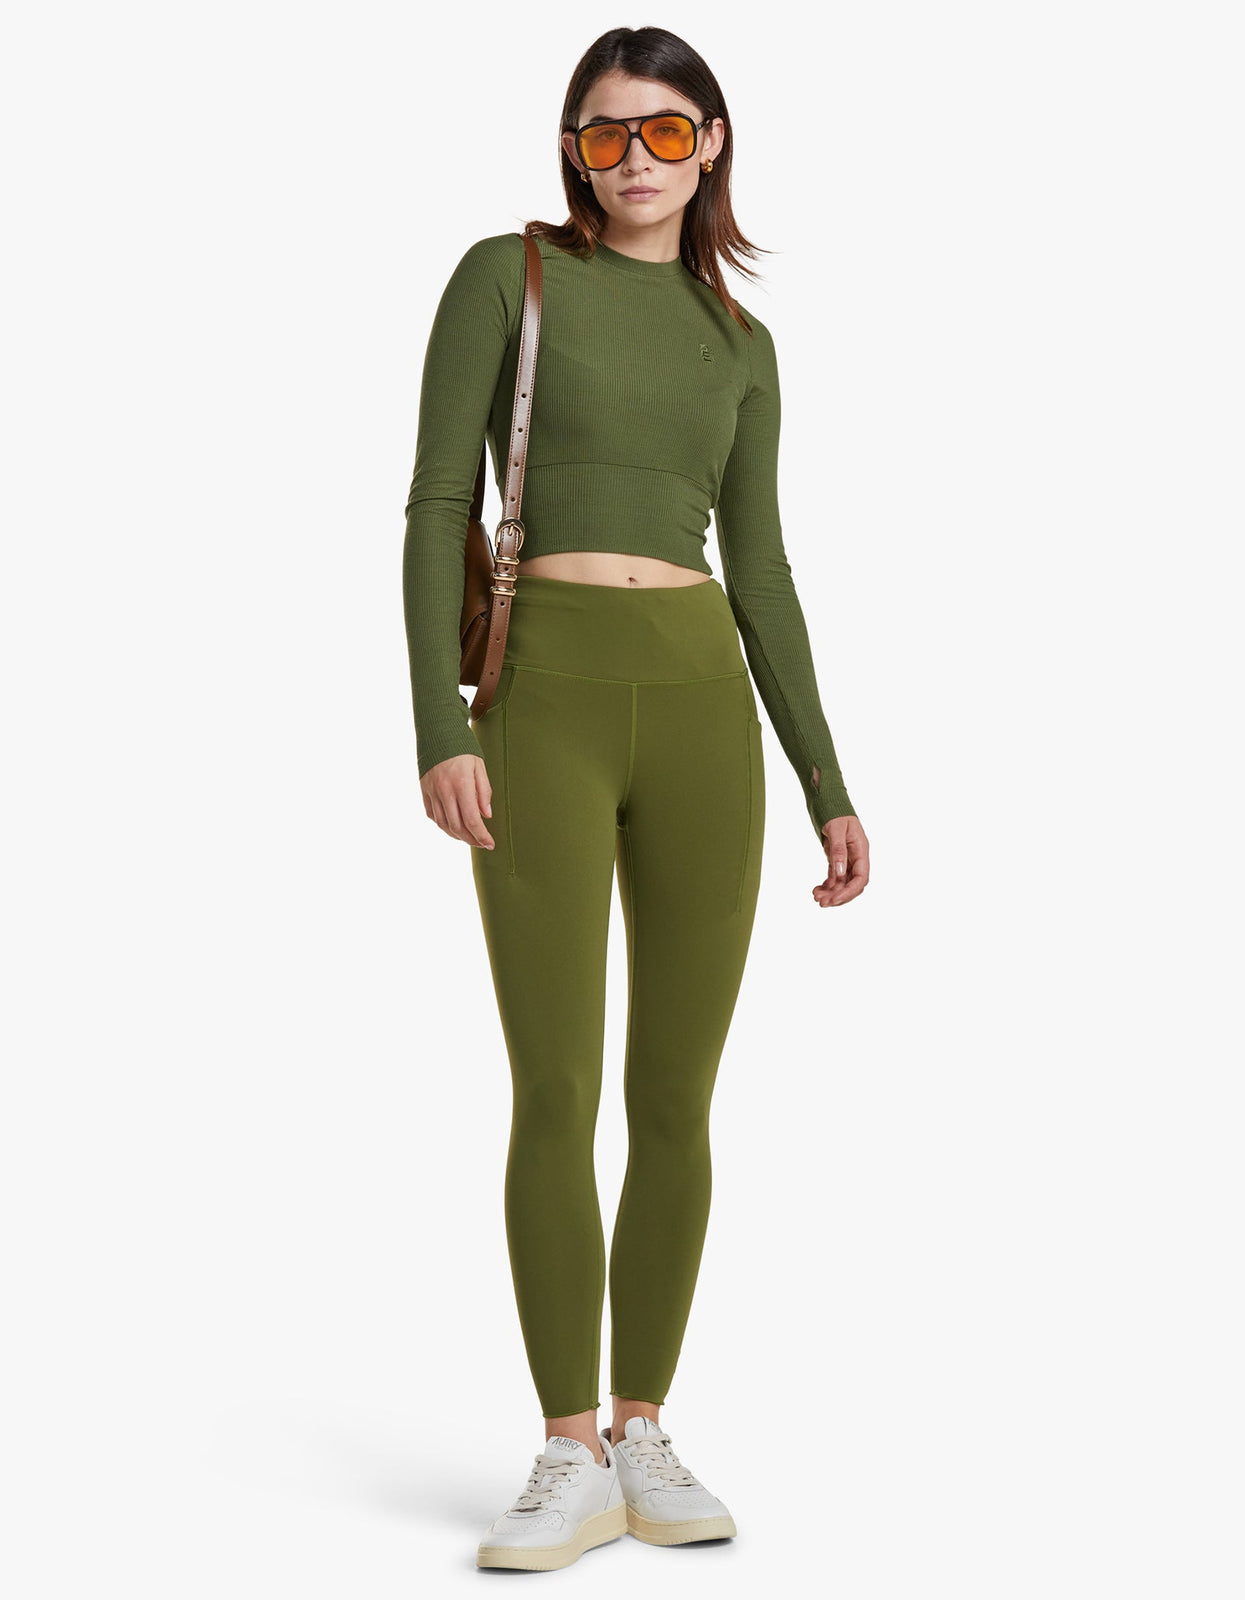 Leggings Outfit Ideas 2020 For Women  International Society of Precision  Agriculture